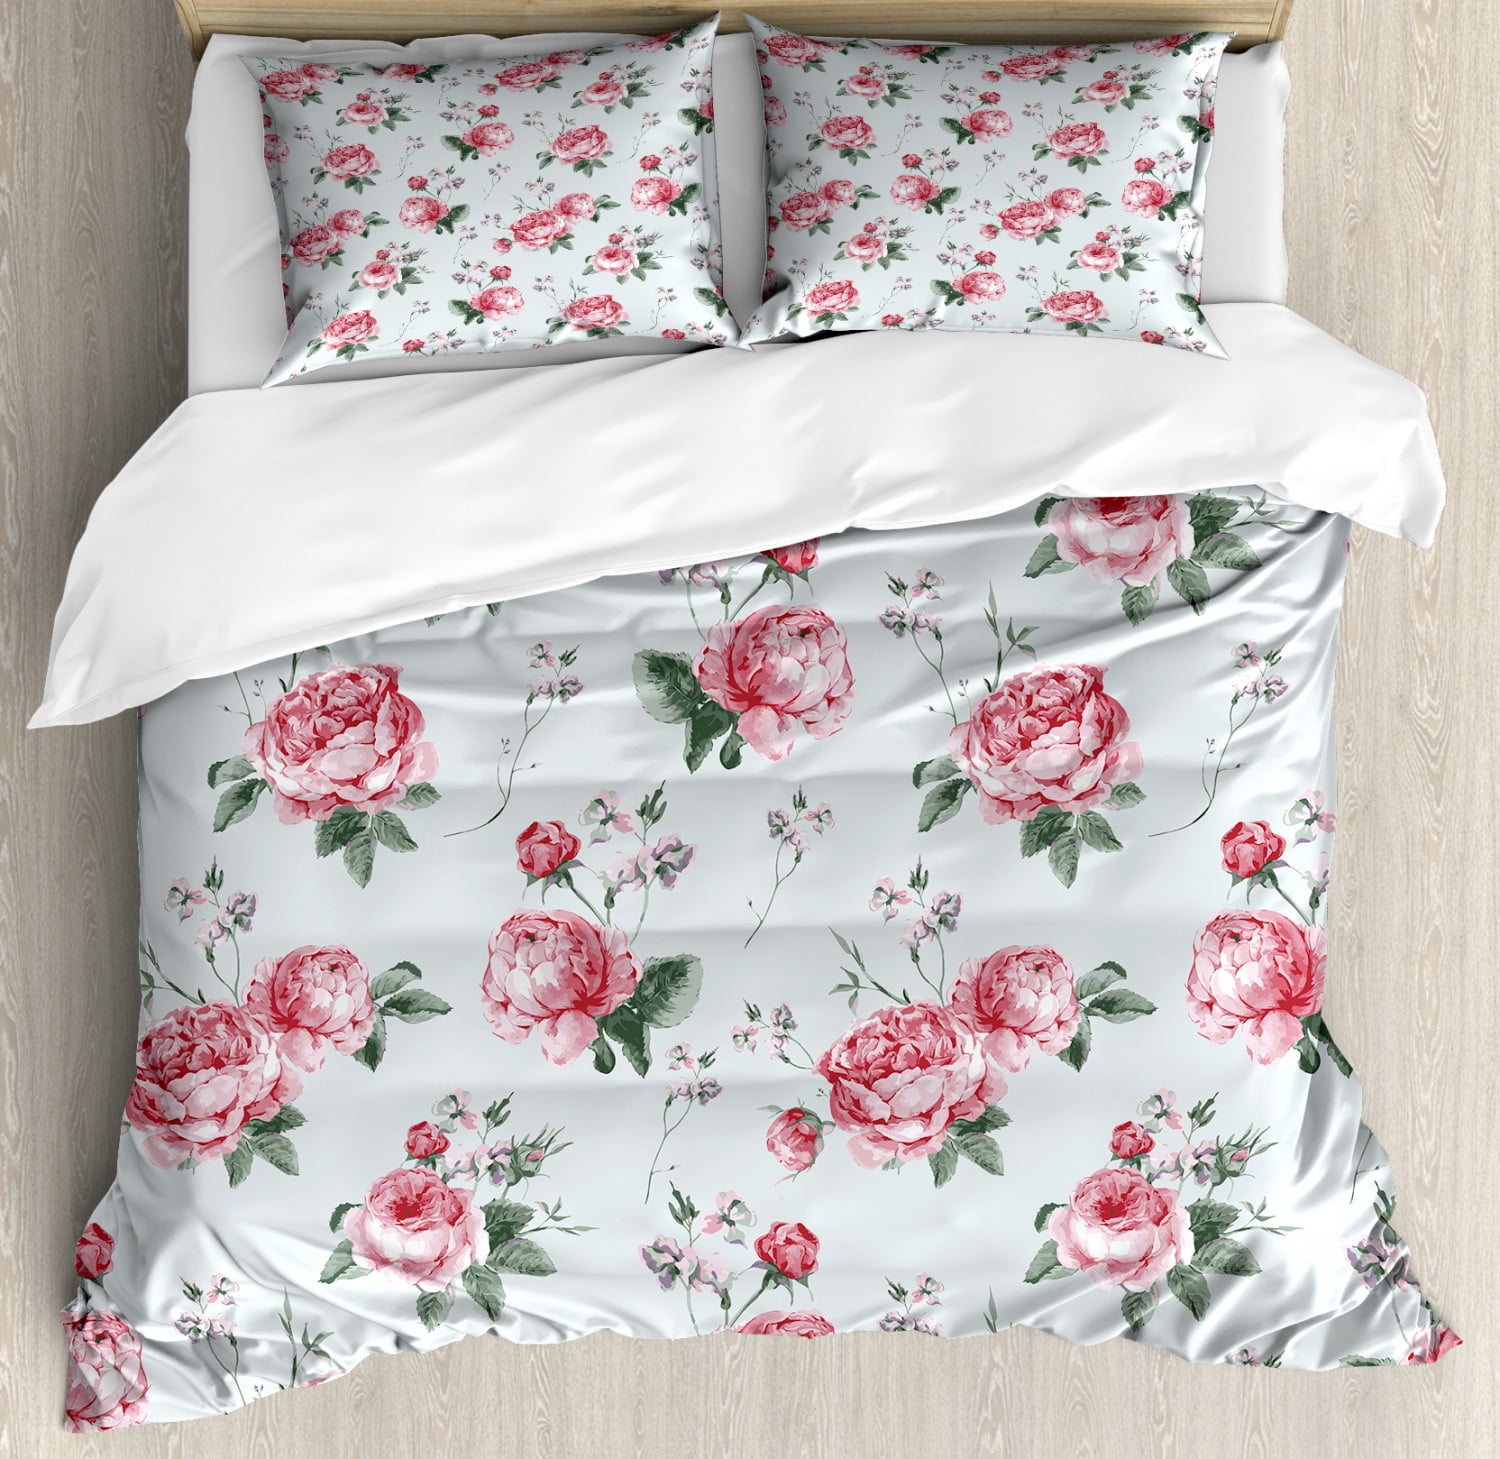 Rose Duvet Cover Set King Size, Blooming English Watercolor Style Garden Shabby Chic Flowers, Decorative 3 Piece Bedding Set with 2 Shams, Reseda Green Pink, by Ambesonne - Walmart.com